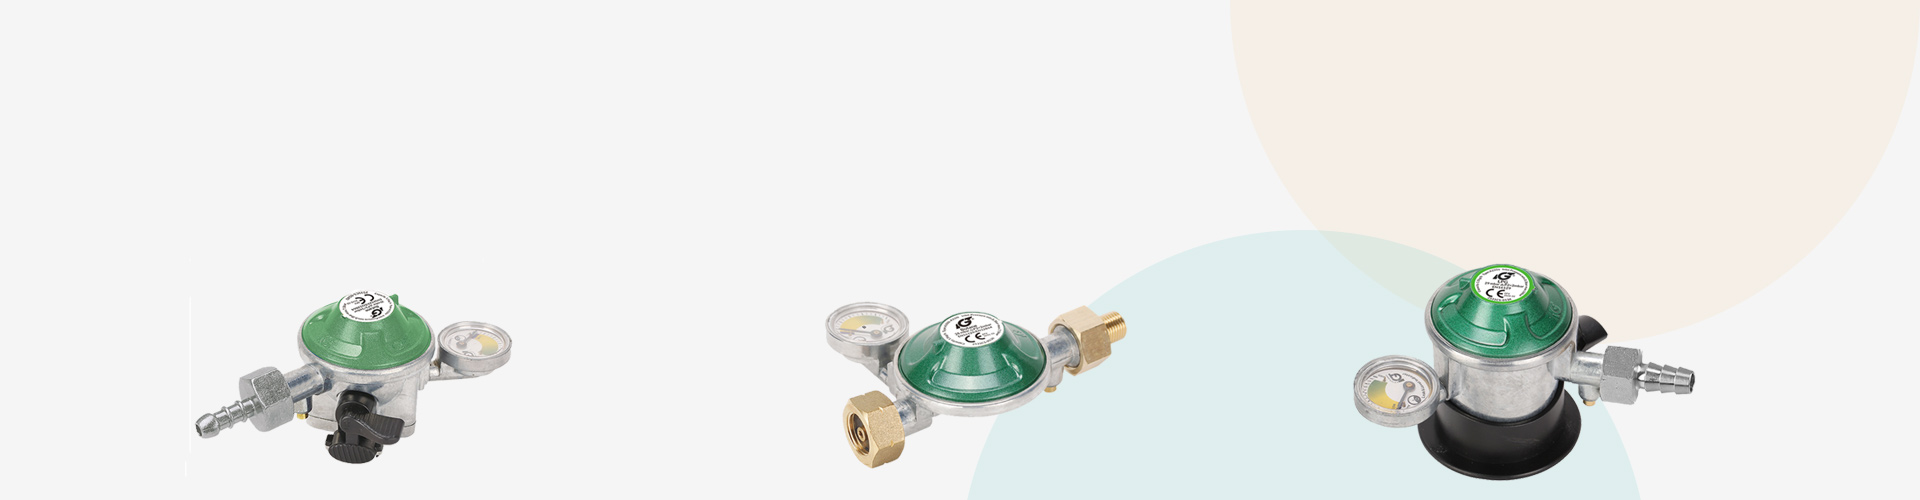 Gas Regulator Connector Types and Safety: The Ultimate Priority